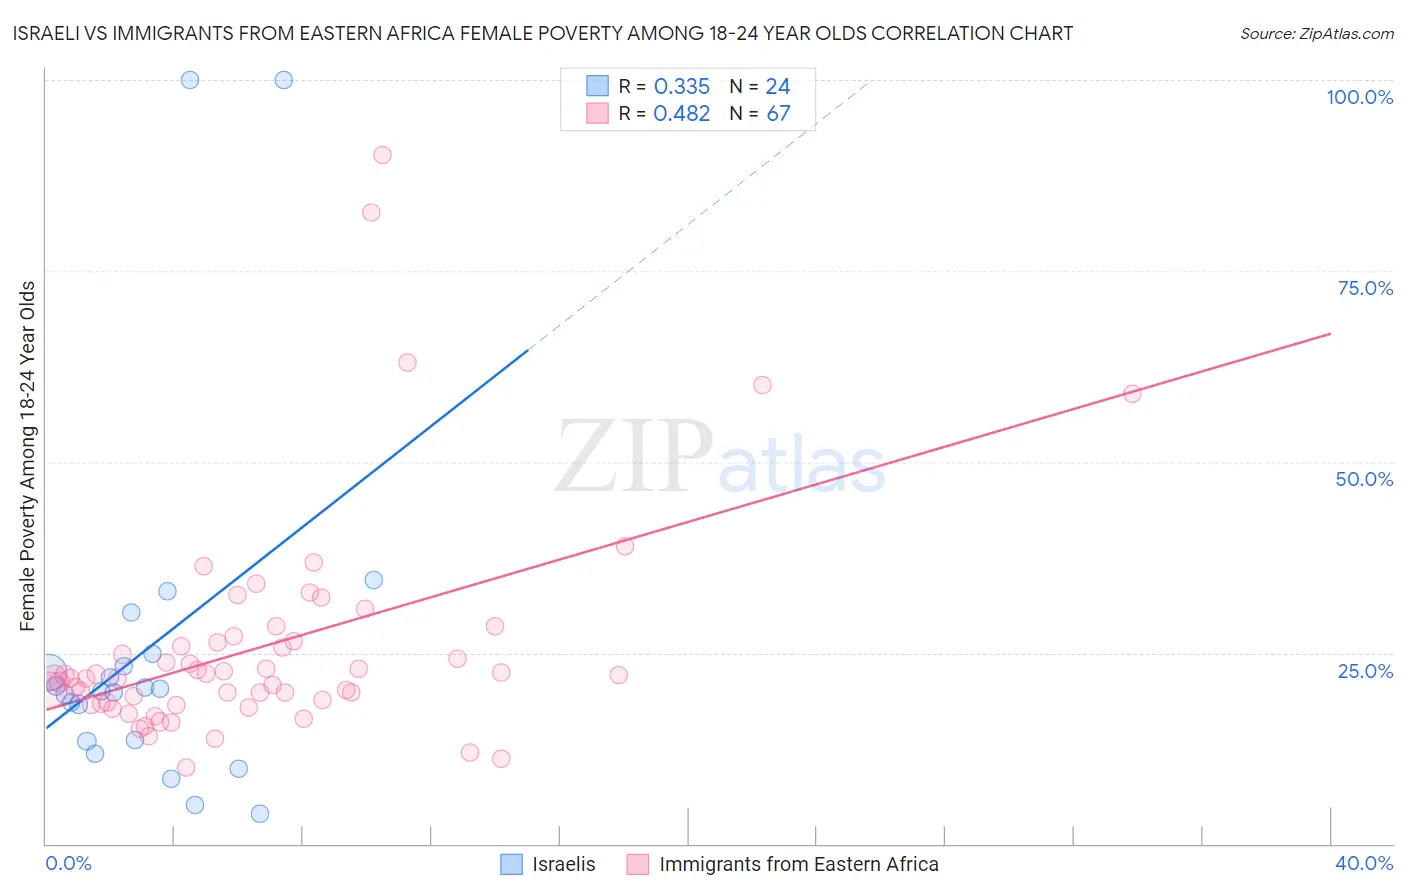 Israeli vs Immigrants from Eastern Africa Female Poverty Among 18-24 Year Olds